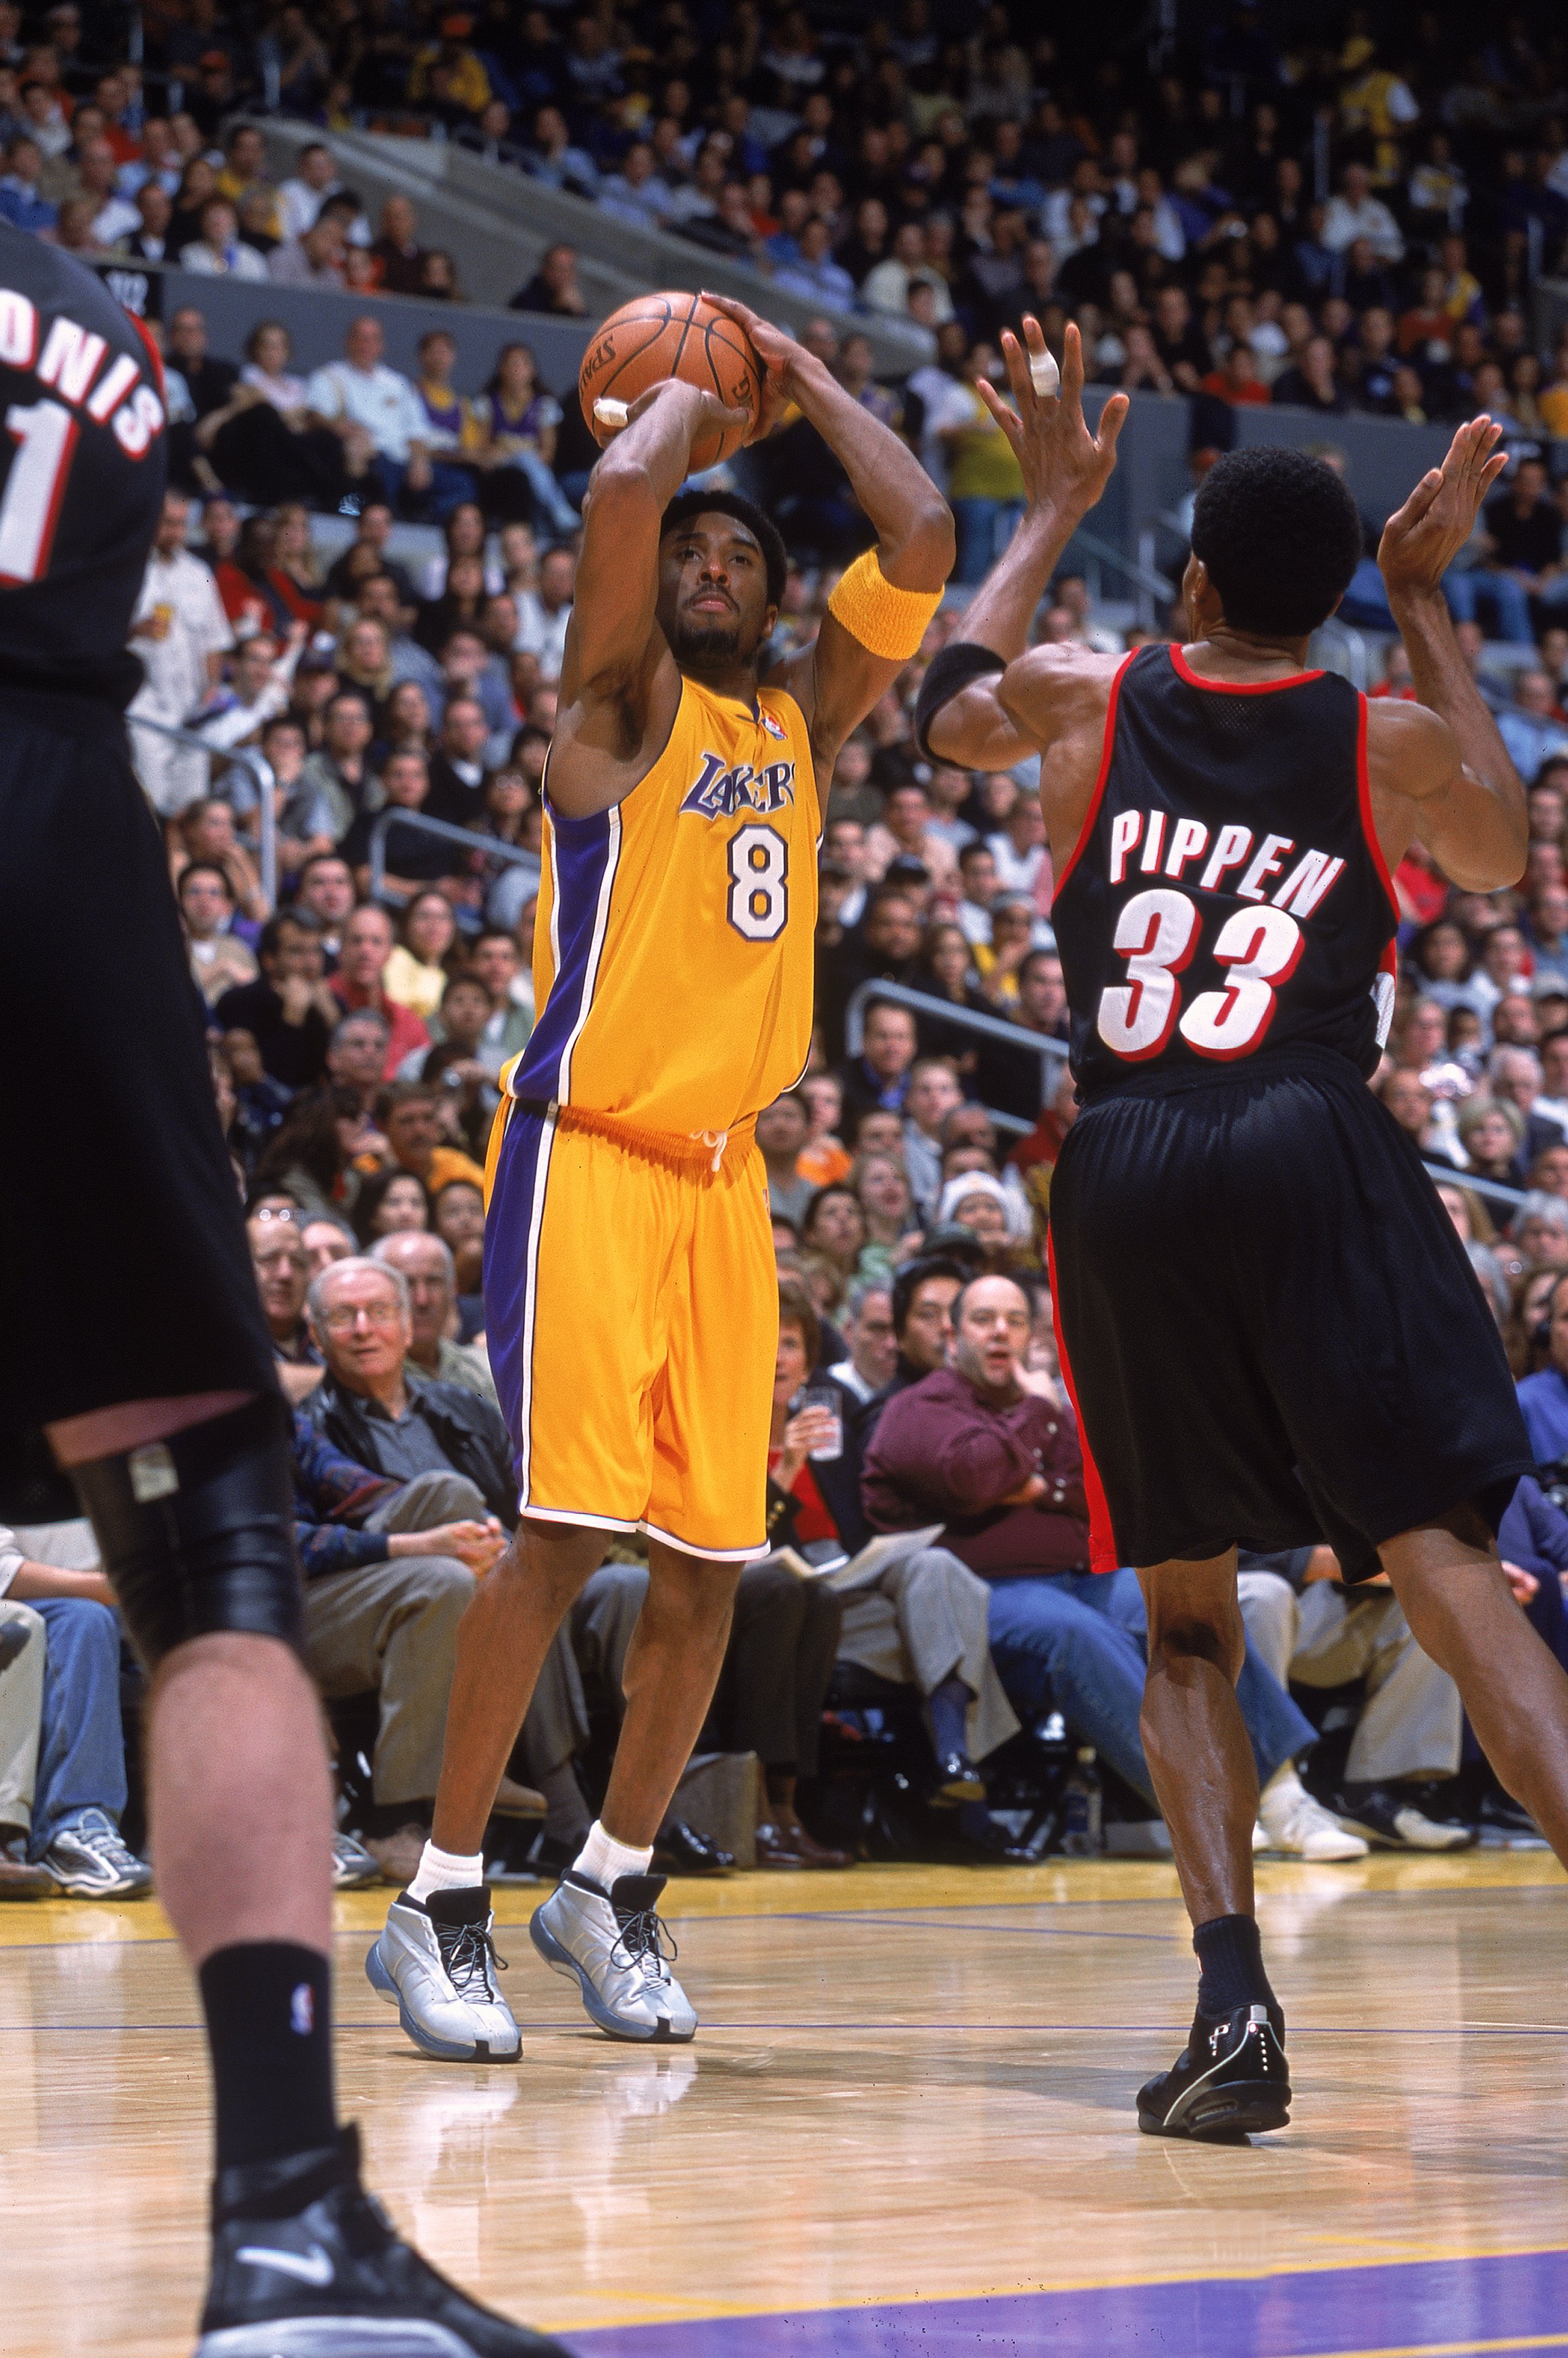 25 Dec 2000:  Kobe Bryant #8 of the Los Angeles Lakers takes a shot against Scottie Pippen #33 of the Portland Trail Blazers during the game at the STAPLES Center in Los Angeles, California. The Trail Blazers defeated the Lakers 109-104.   NOTE TO USER: I